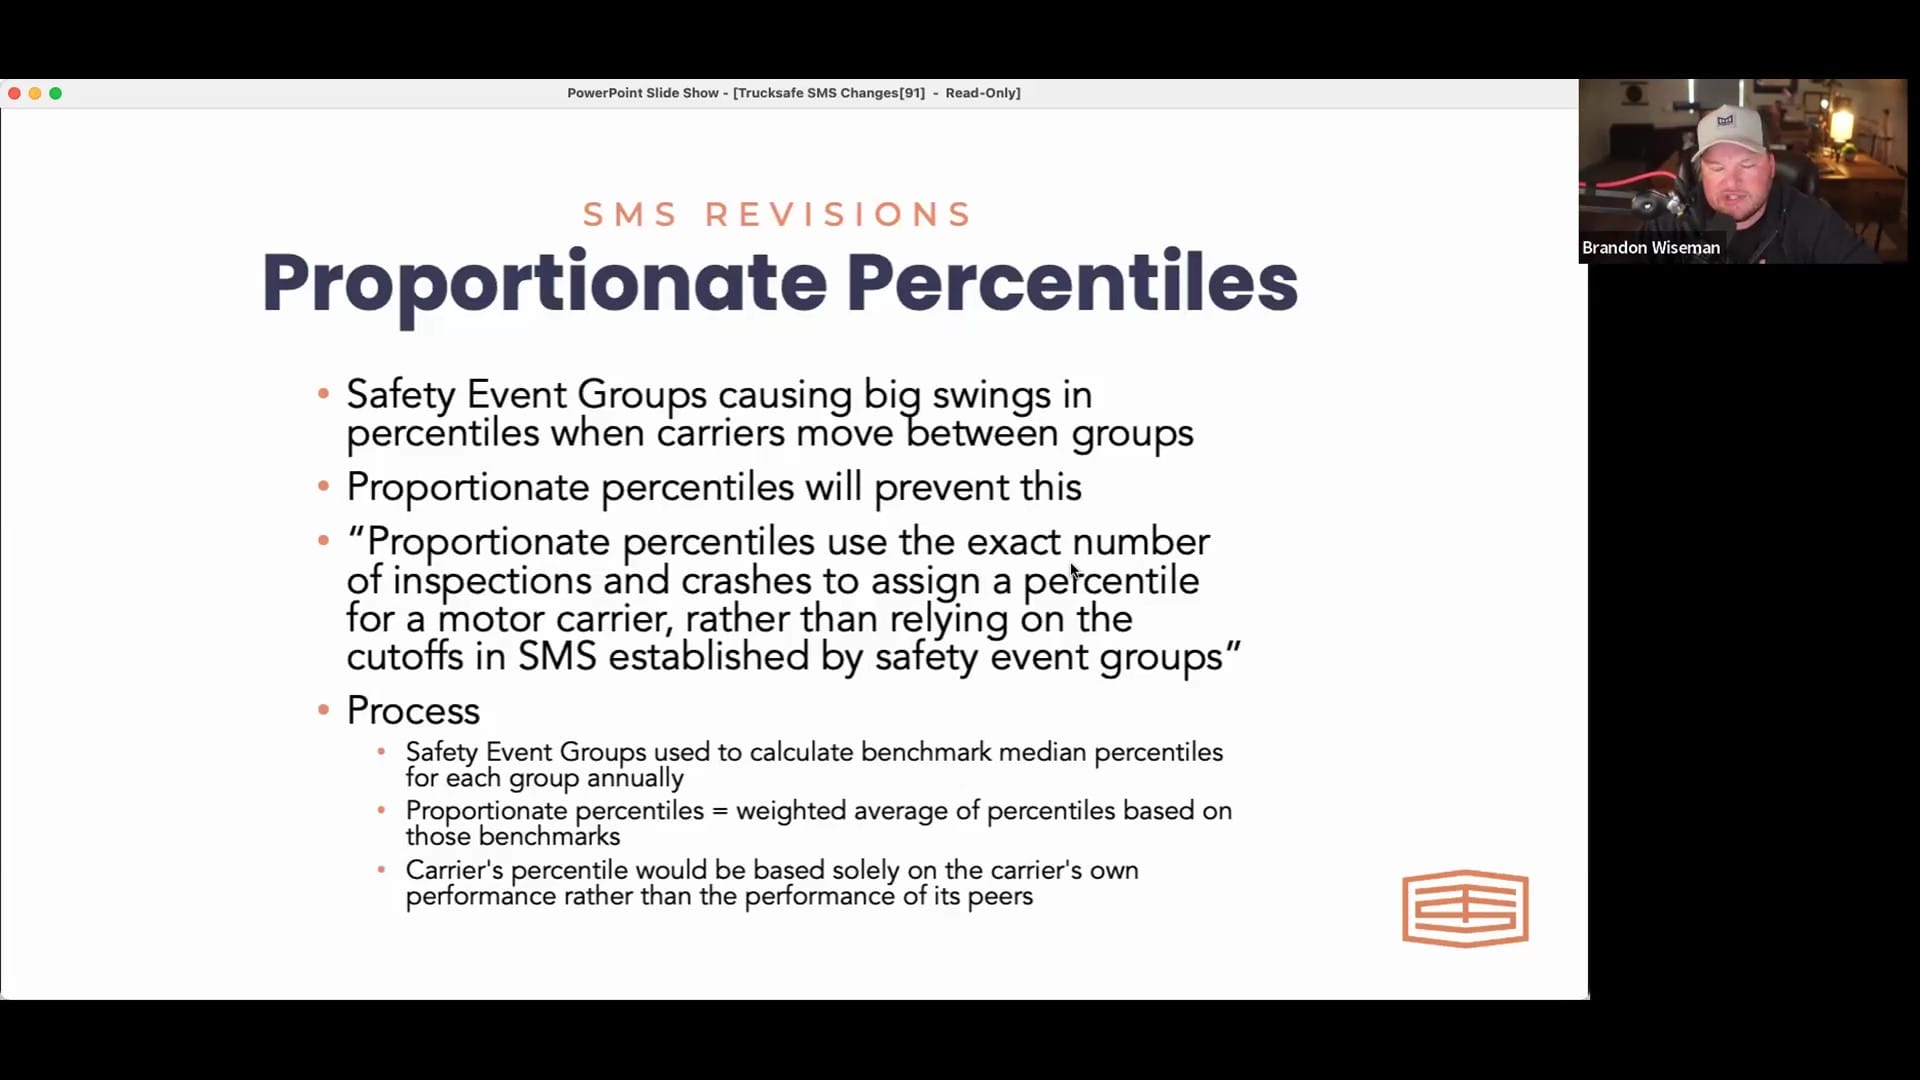 SMS Revisions Proportionate Percentiles